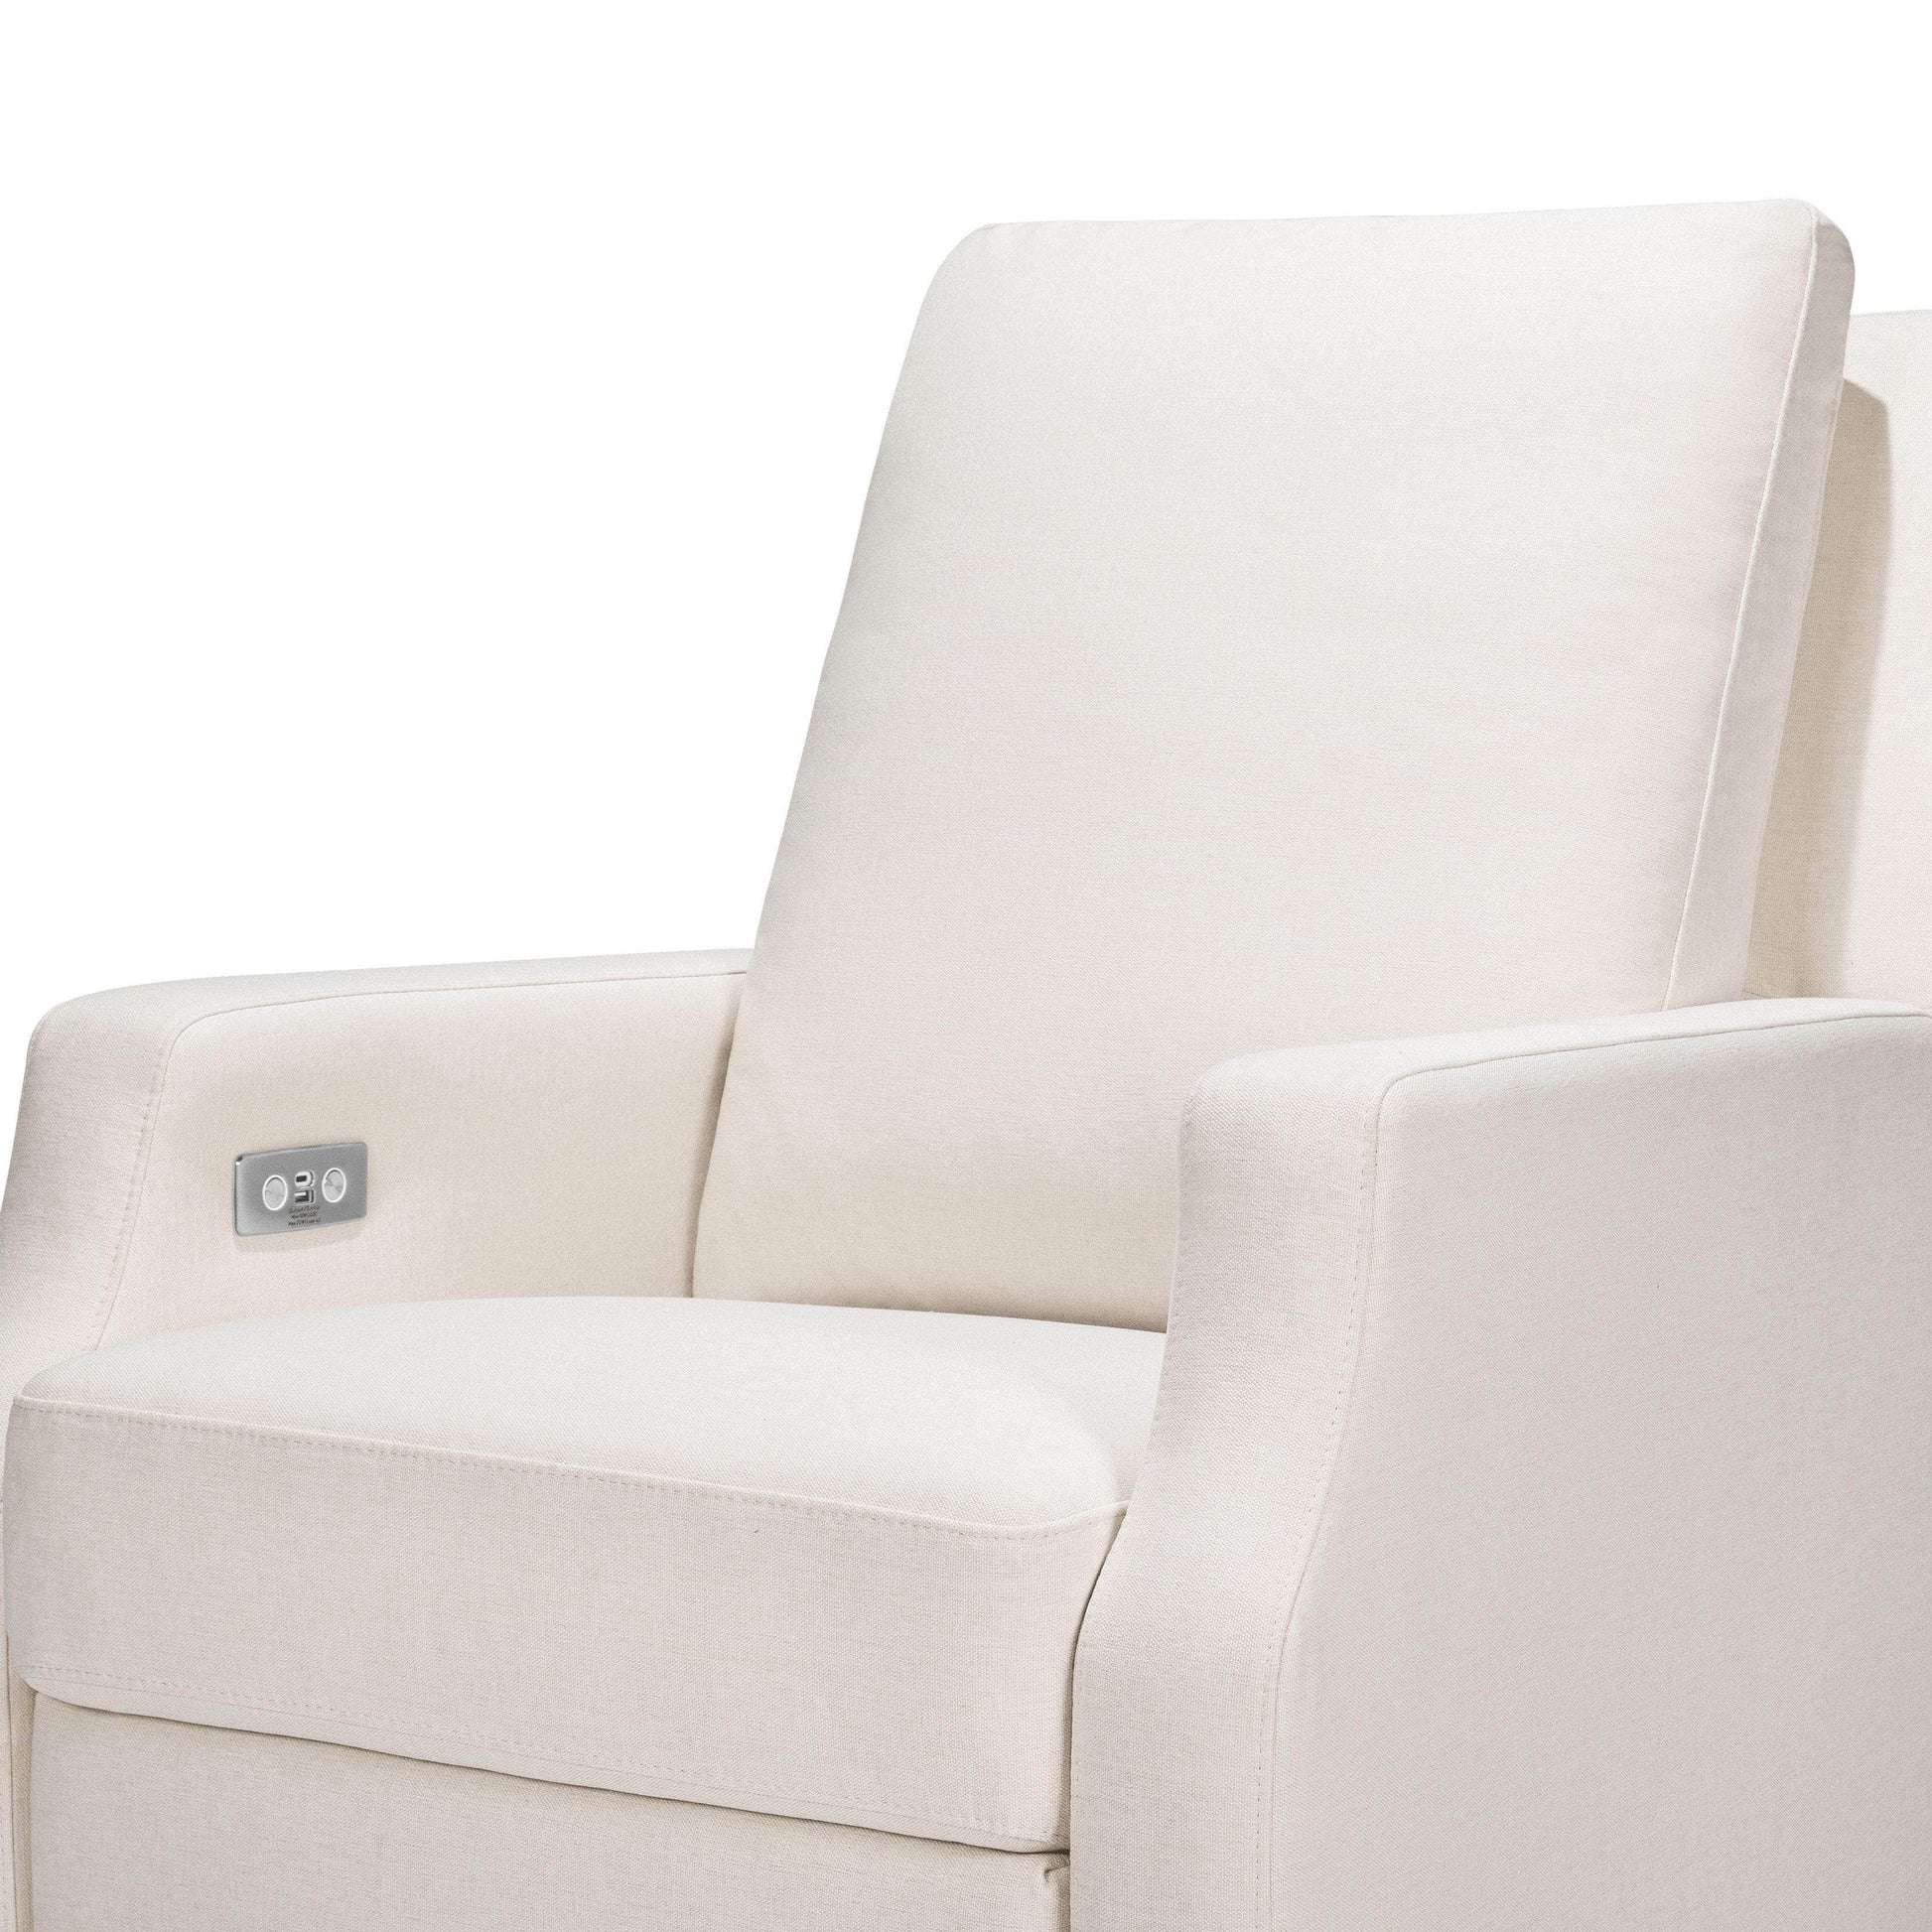 M22286PCMEWLB,Crewe Electronic Swivel Glider Recliner in Performance Cream Eco-Weave w/Light Wood Base